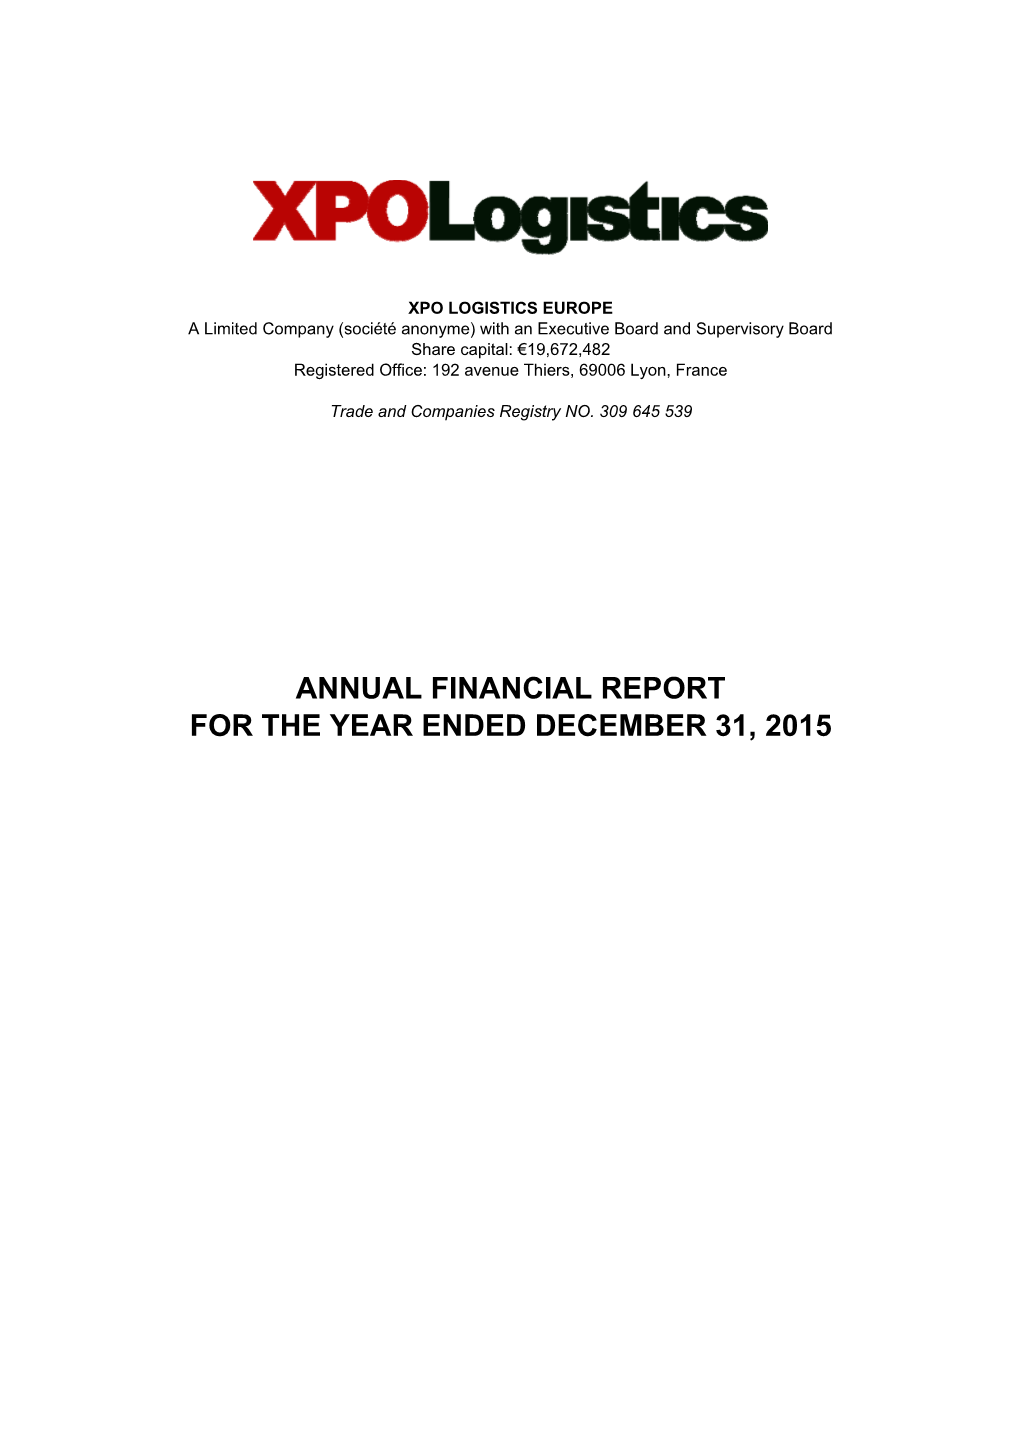 Annual Financial Report for the Year Ended December 31, 2015